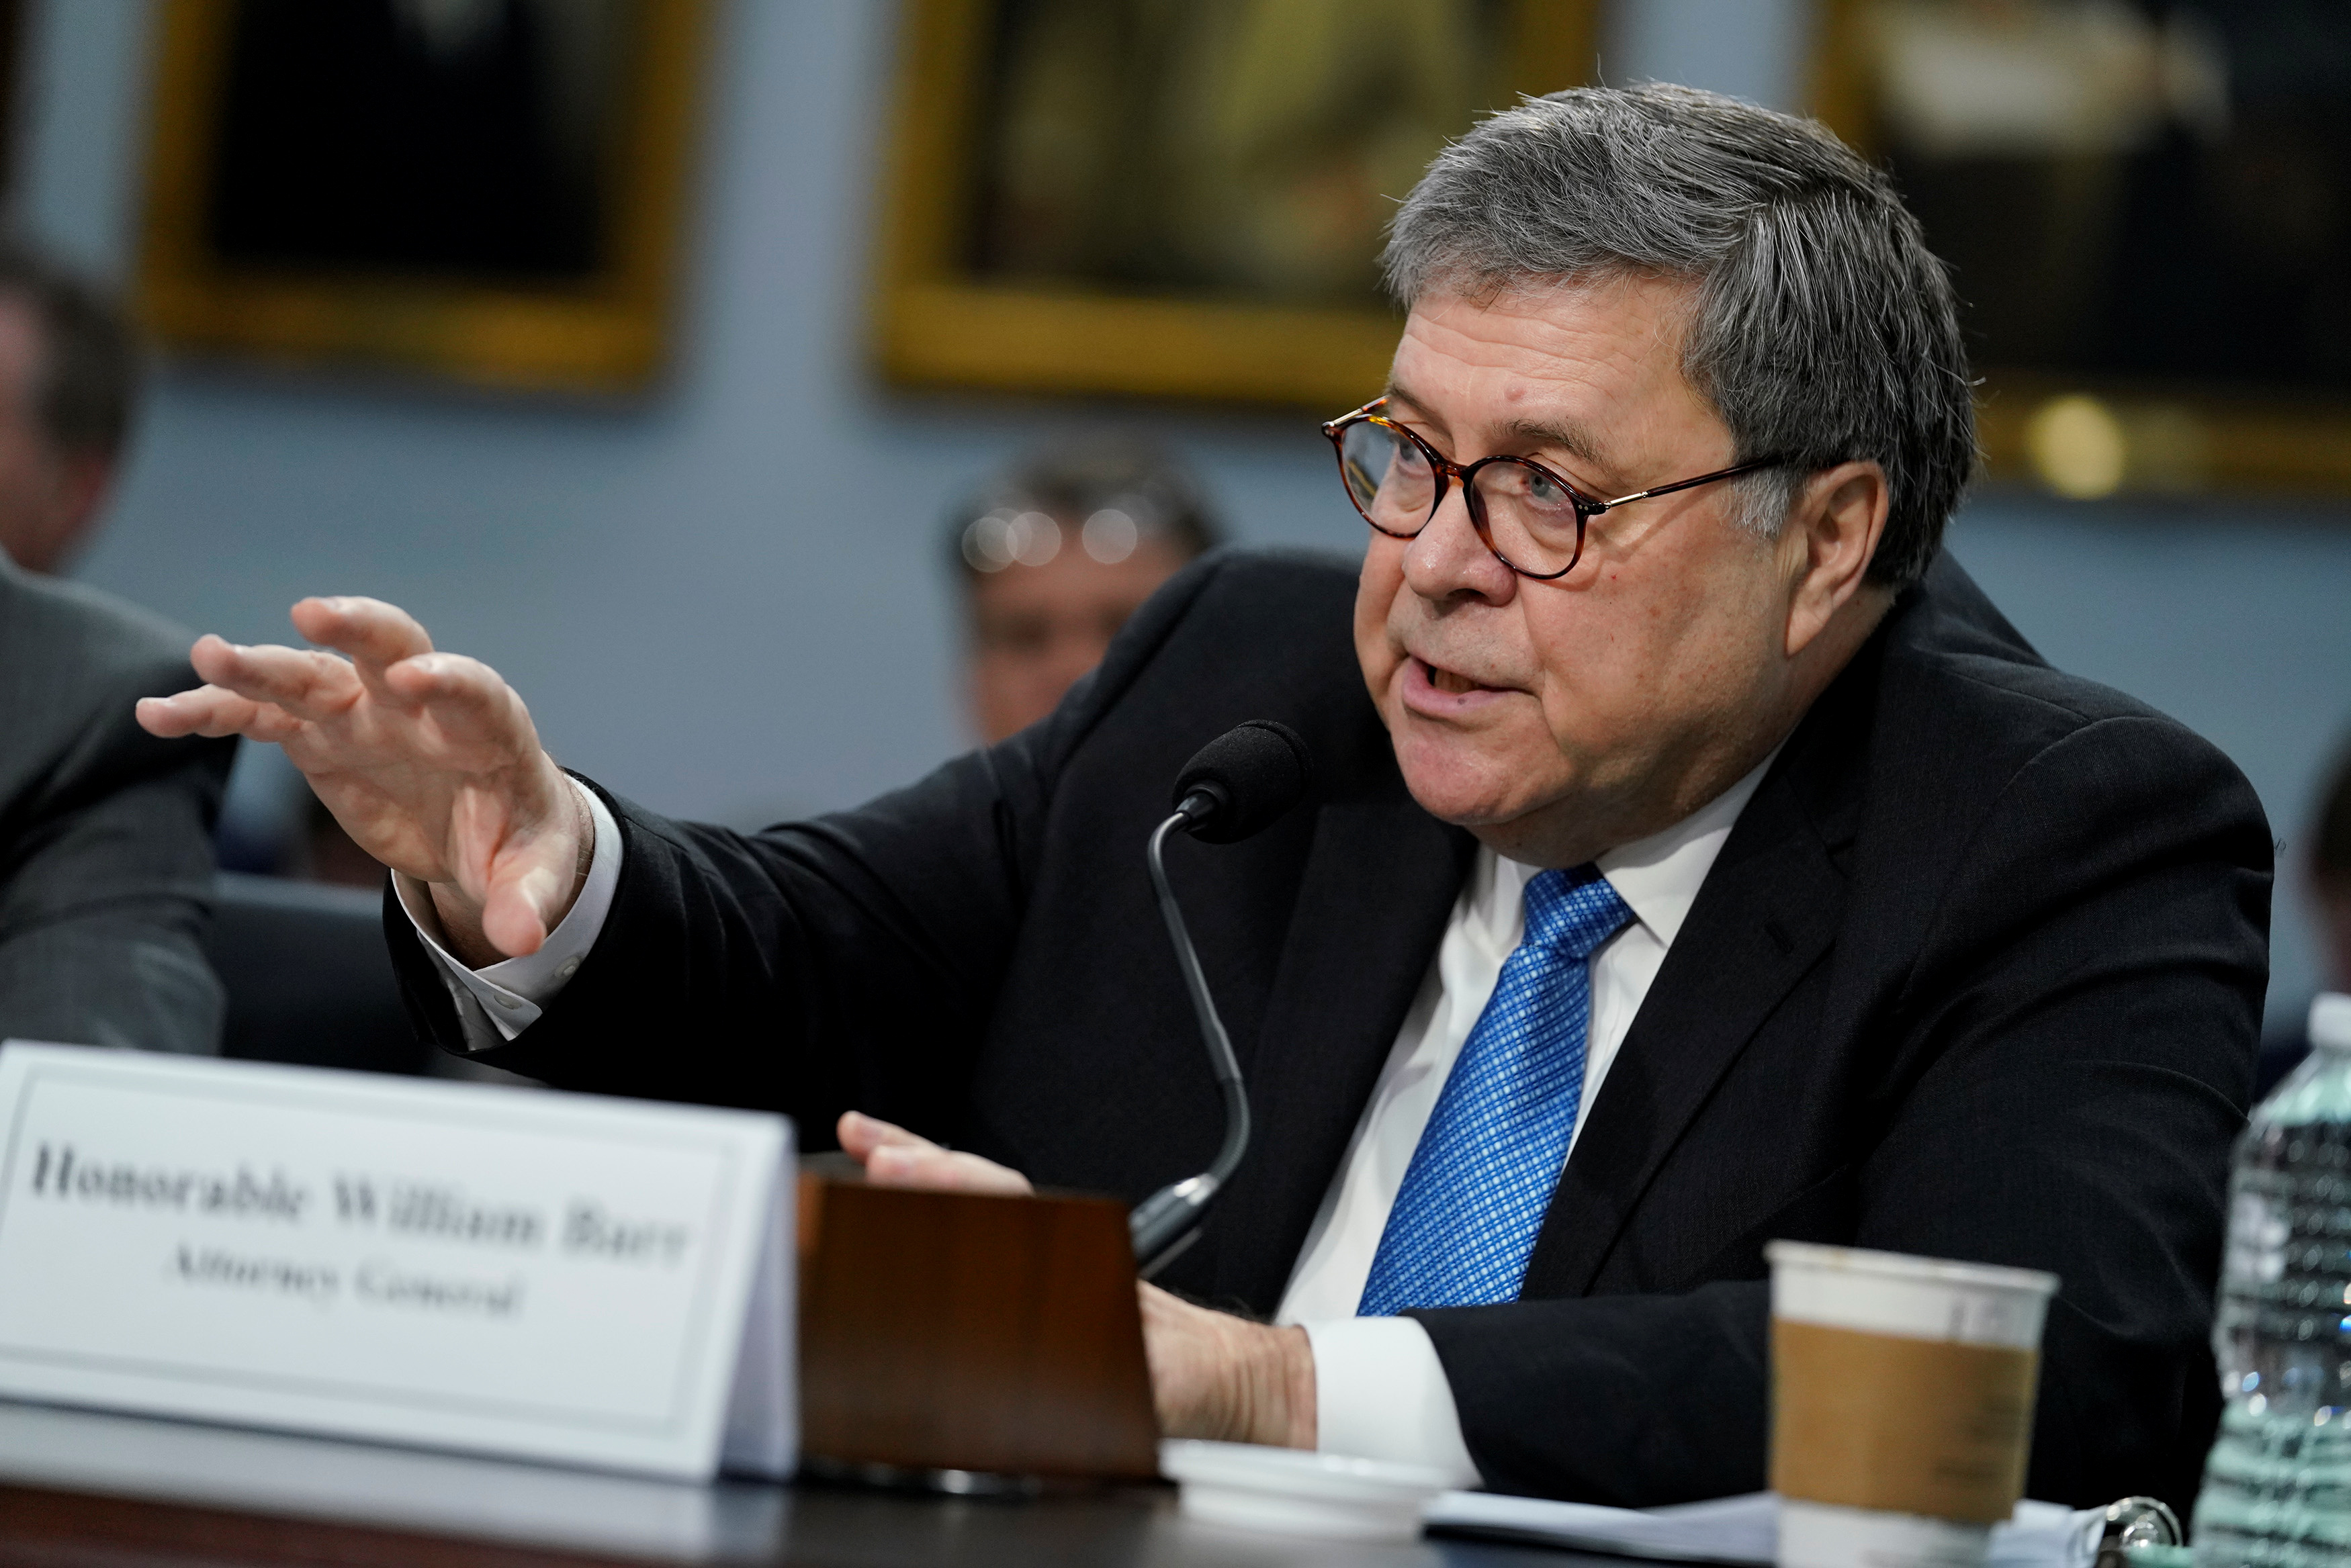 U.S. Attorney General William Barr testifies on the Justice Department's budget proposal before a House Appropriations Subcommittee hearing on Capitol Hill in Washington, U.S., April 9, 2019. REUTERS/Aaron P. Bernstein